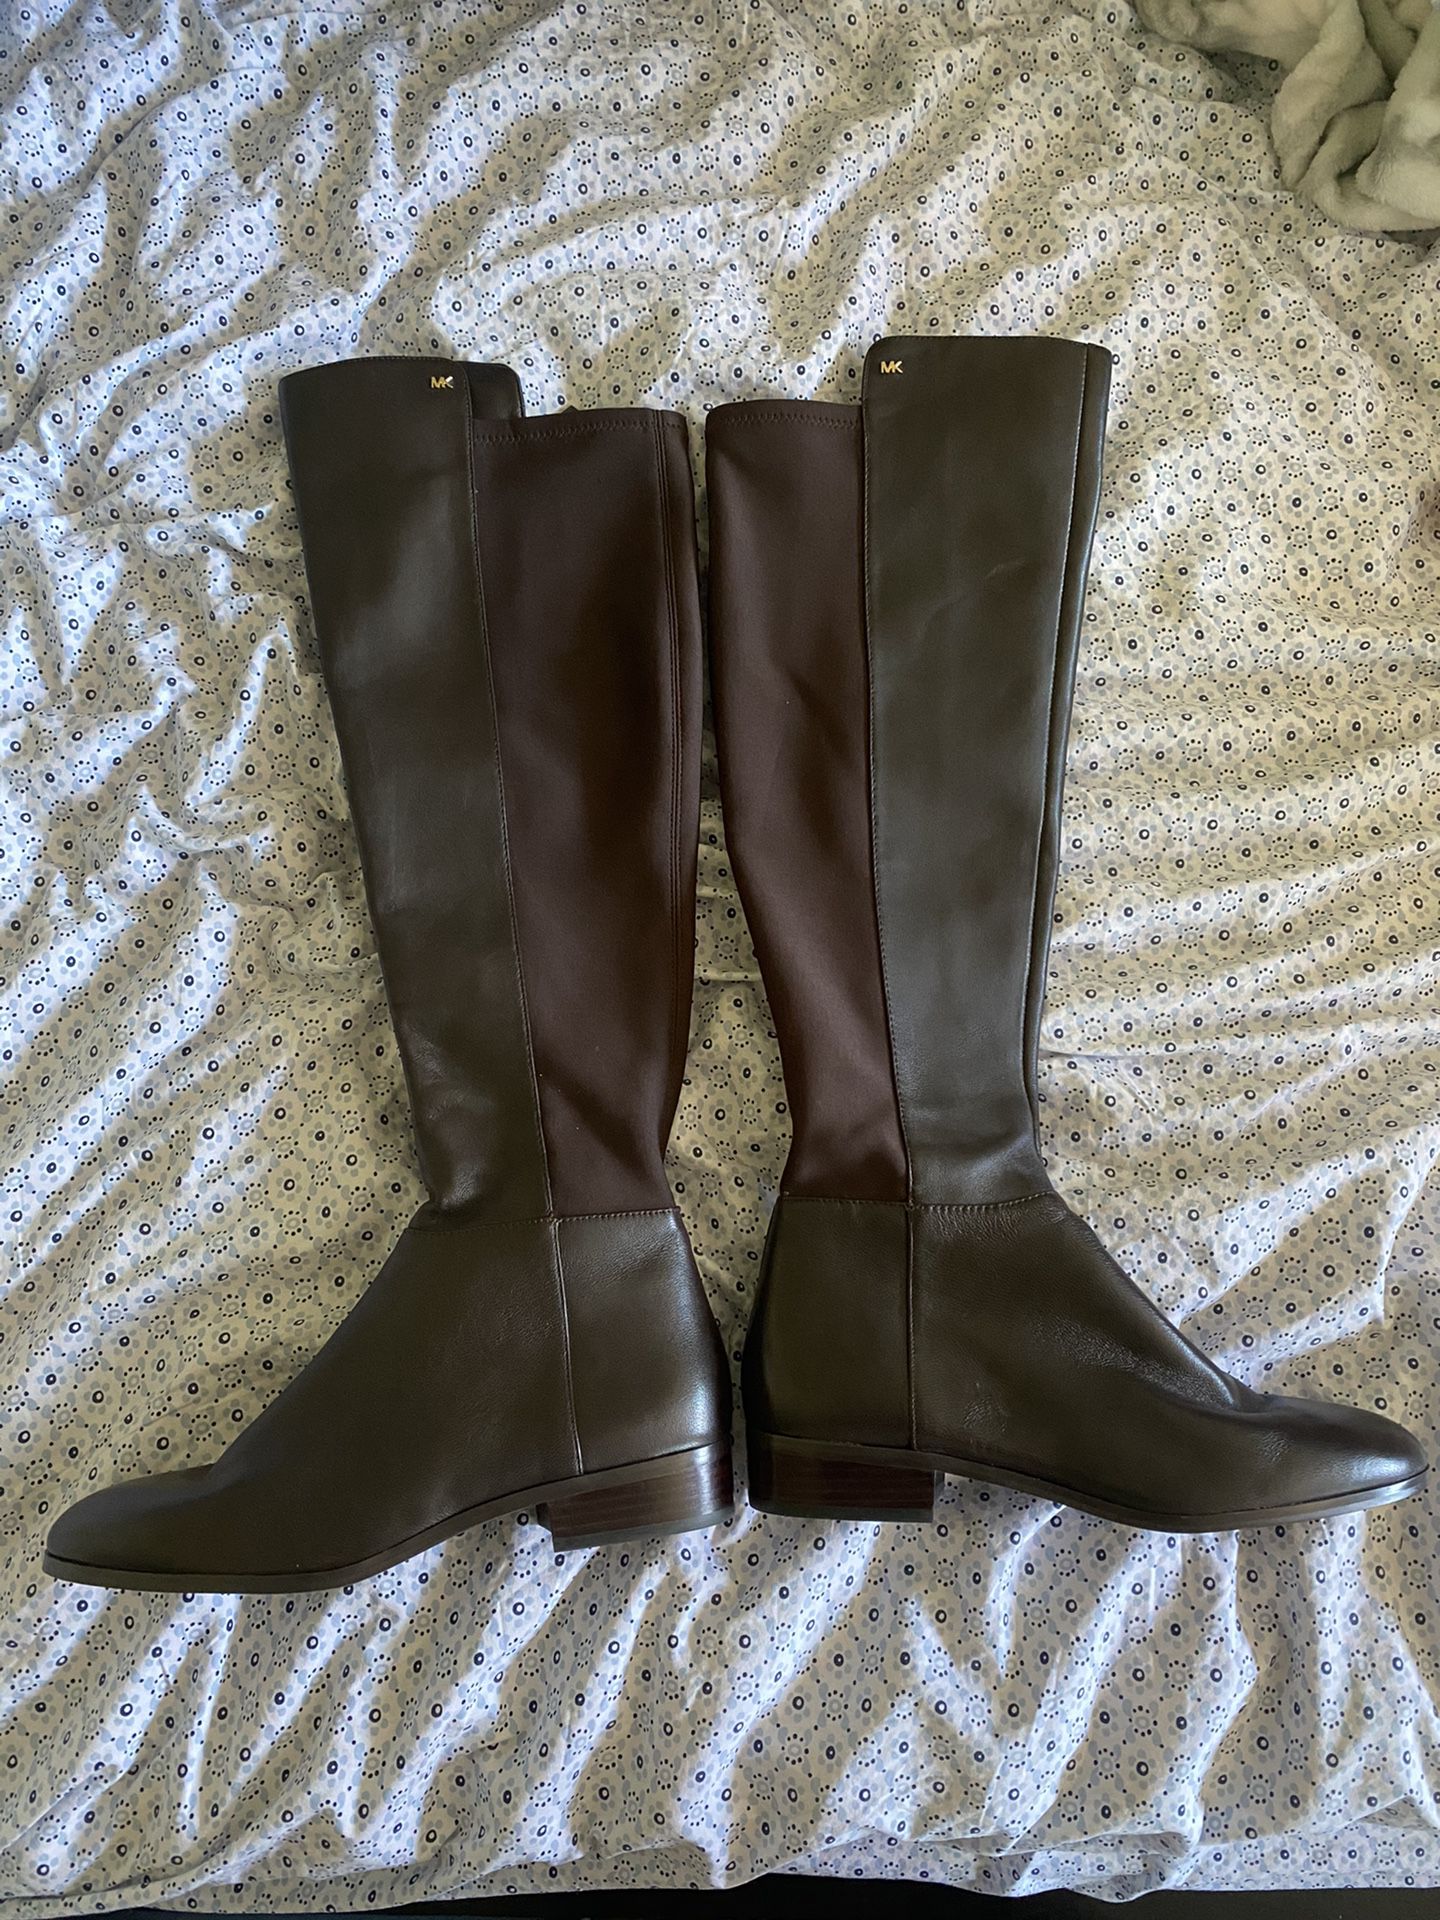 Michael Kors Brown Boots Size 8 M (New)